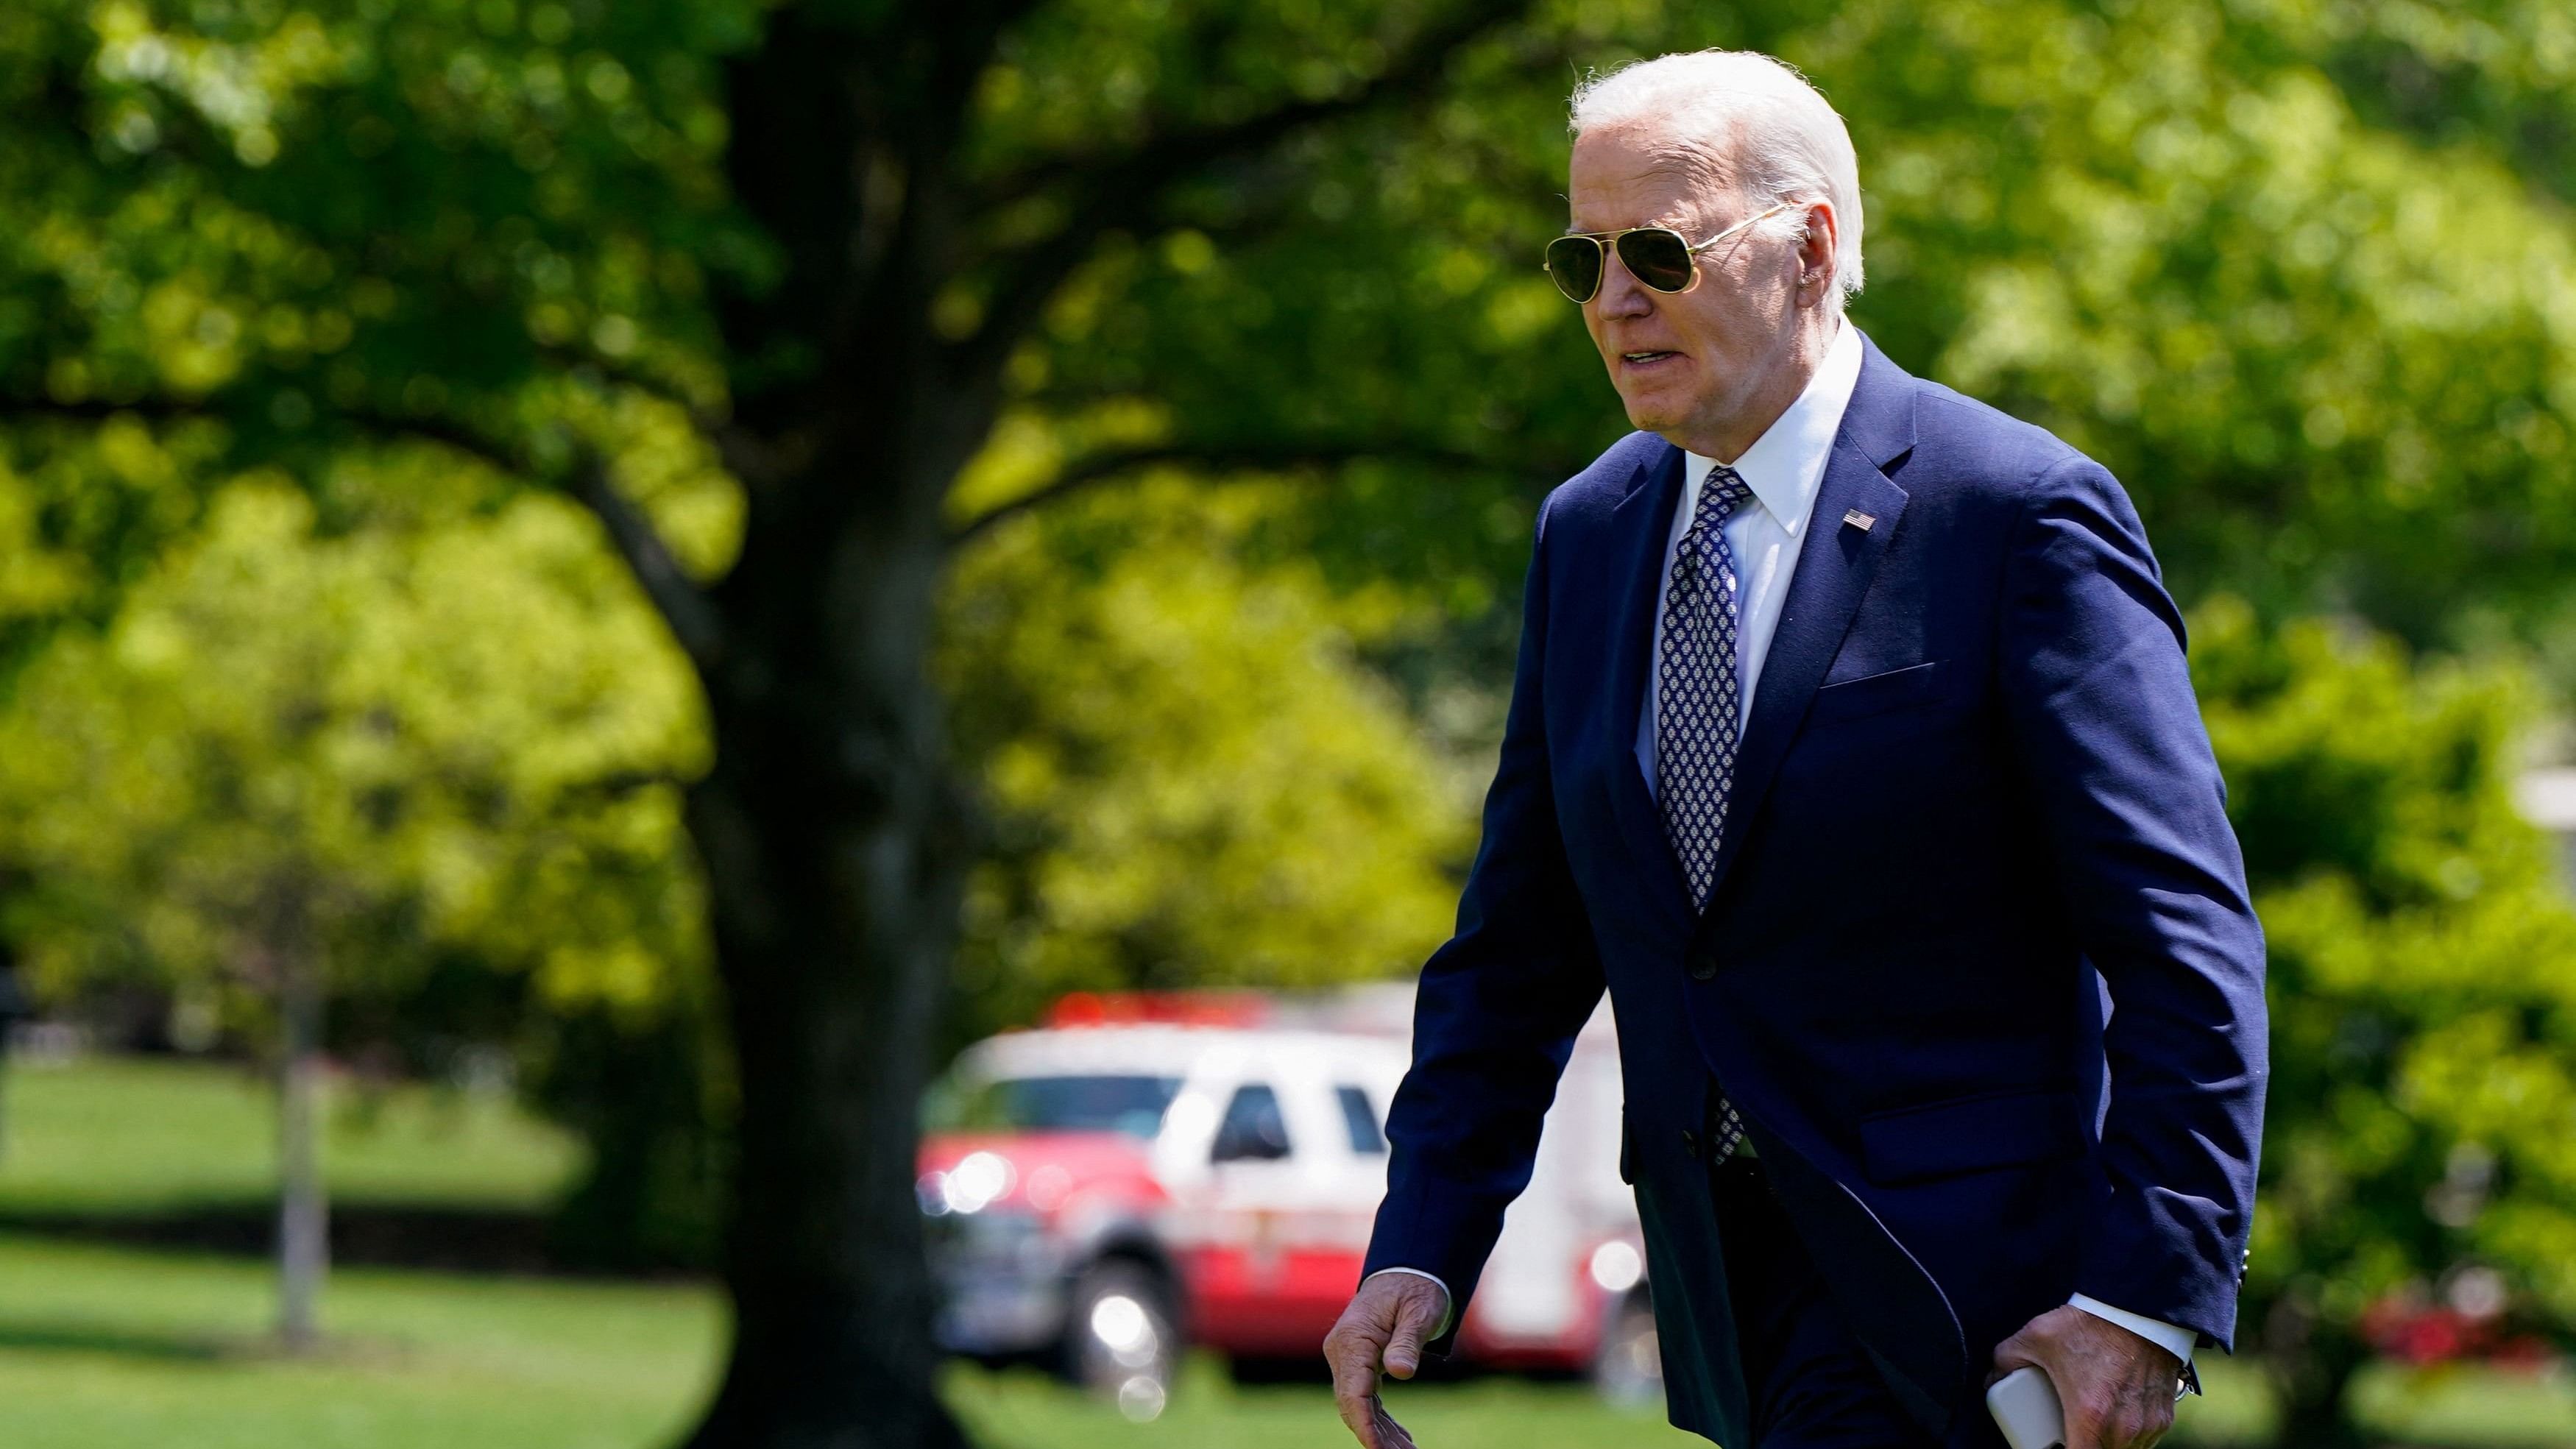 <div class="paragraphs"><p>US President Joe Biden walks back to the White House after disembarking from Marine One, Washington, US.</p></div>